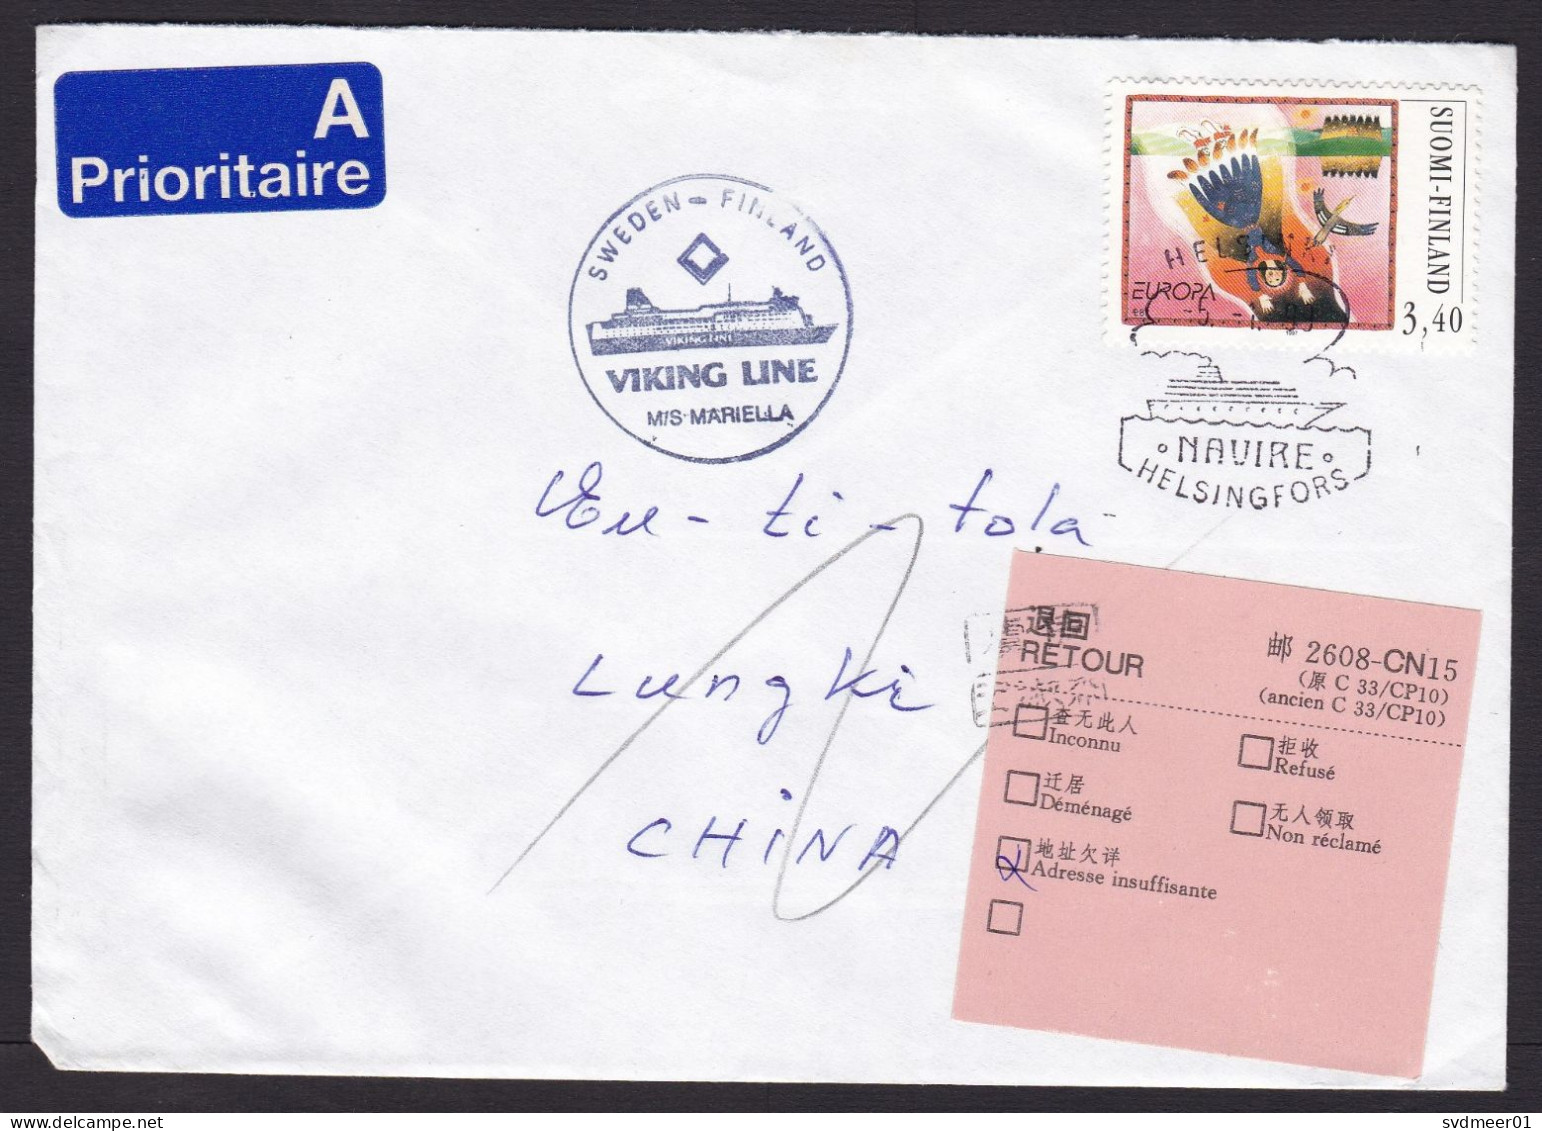 Finland: Cover To China, 1999, 1 Stamp, Ship Cancel Viking Line, Returned, CN15 Retour Label (traces Of Use) - Brieven En Documenten